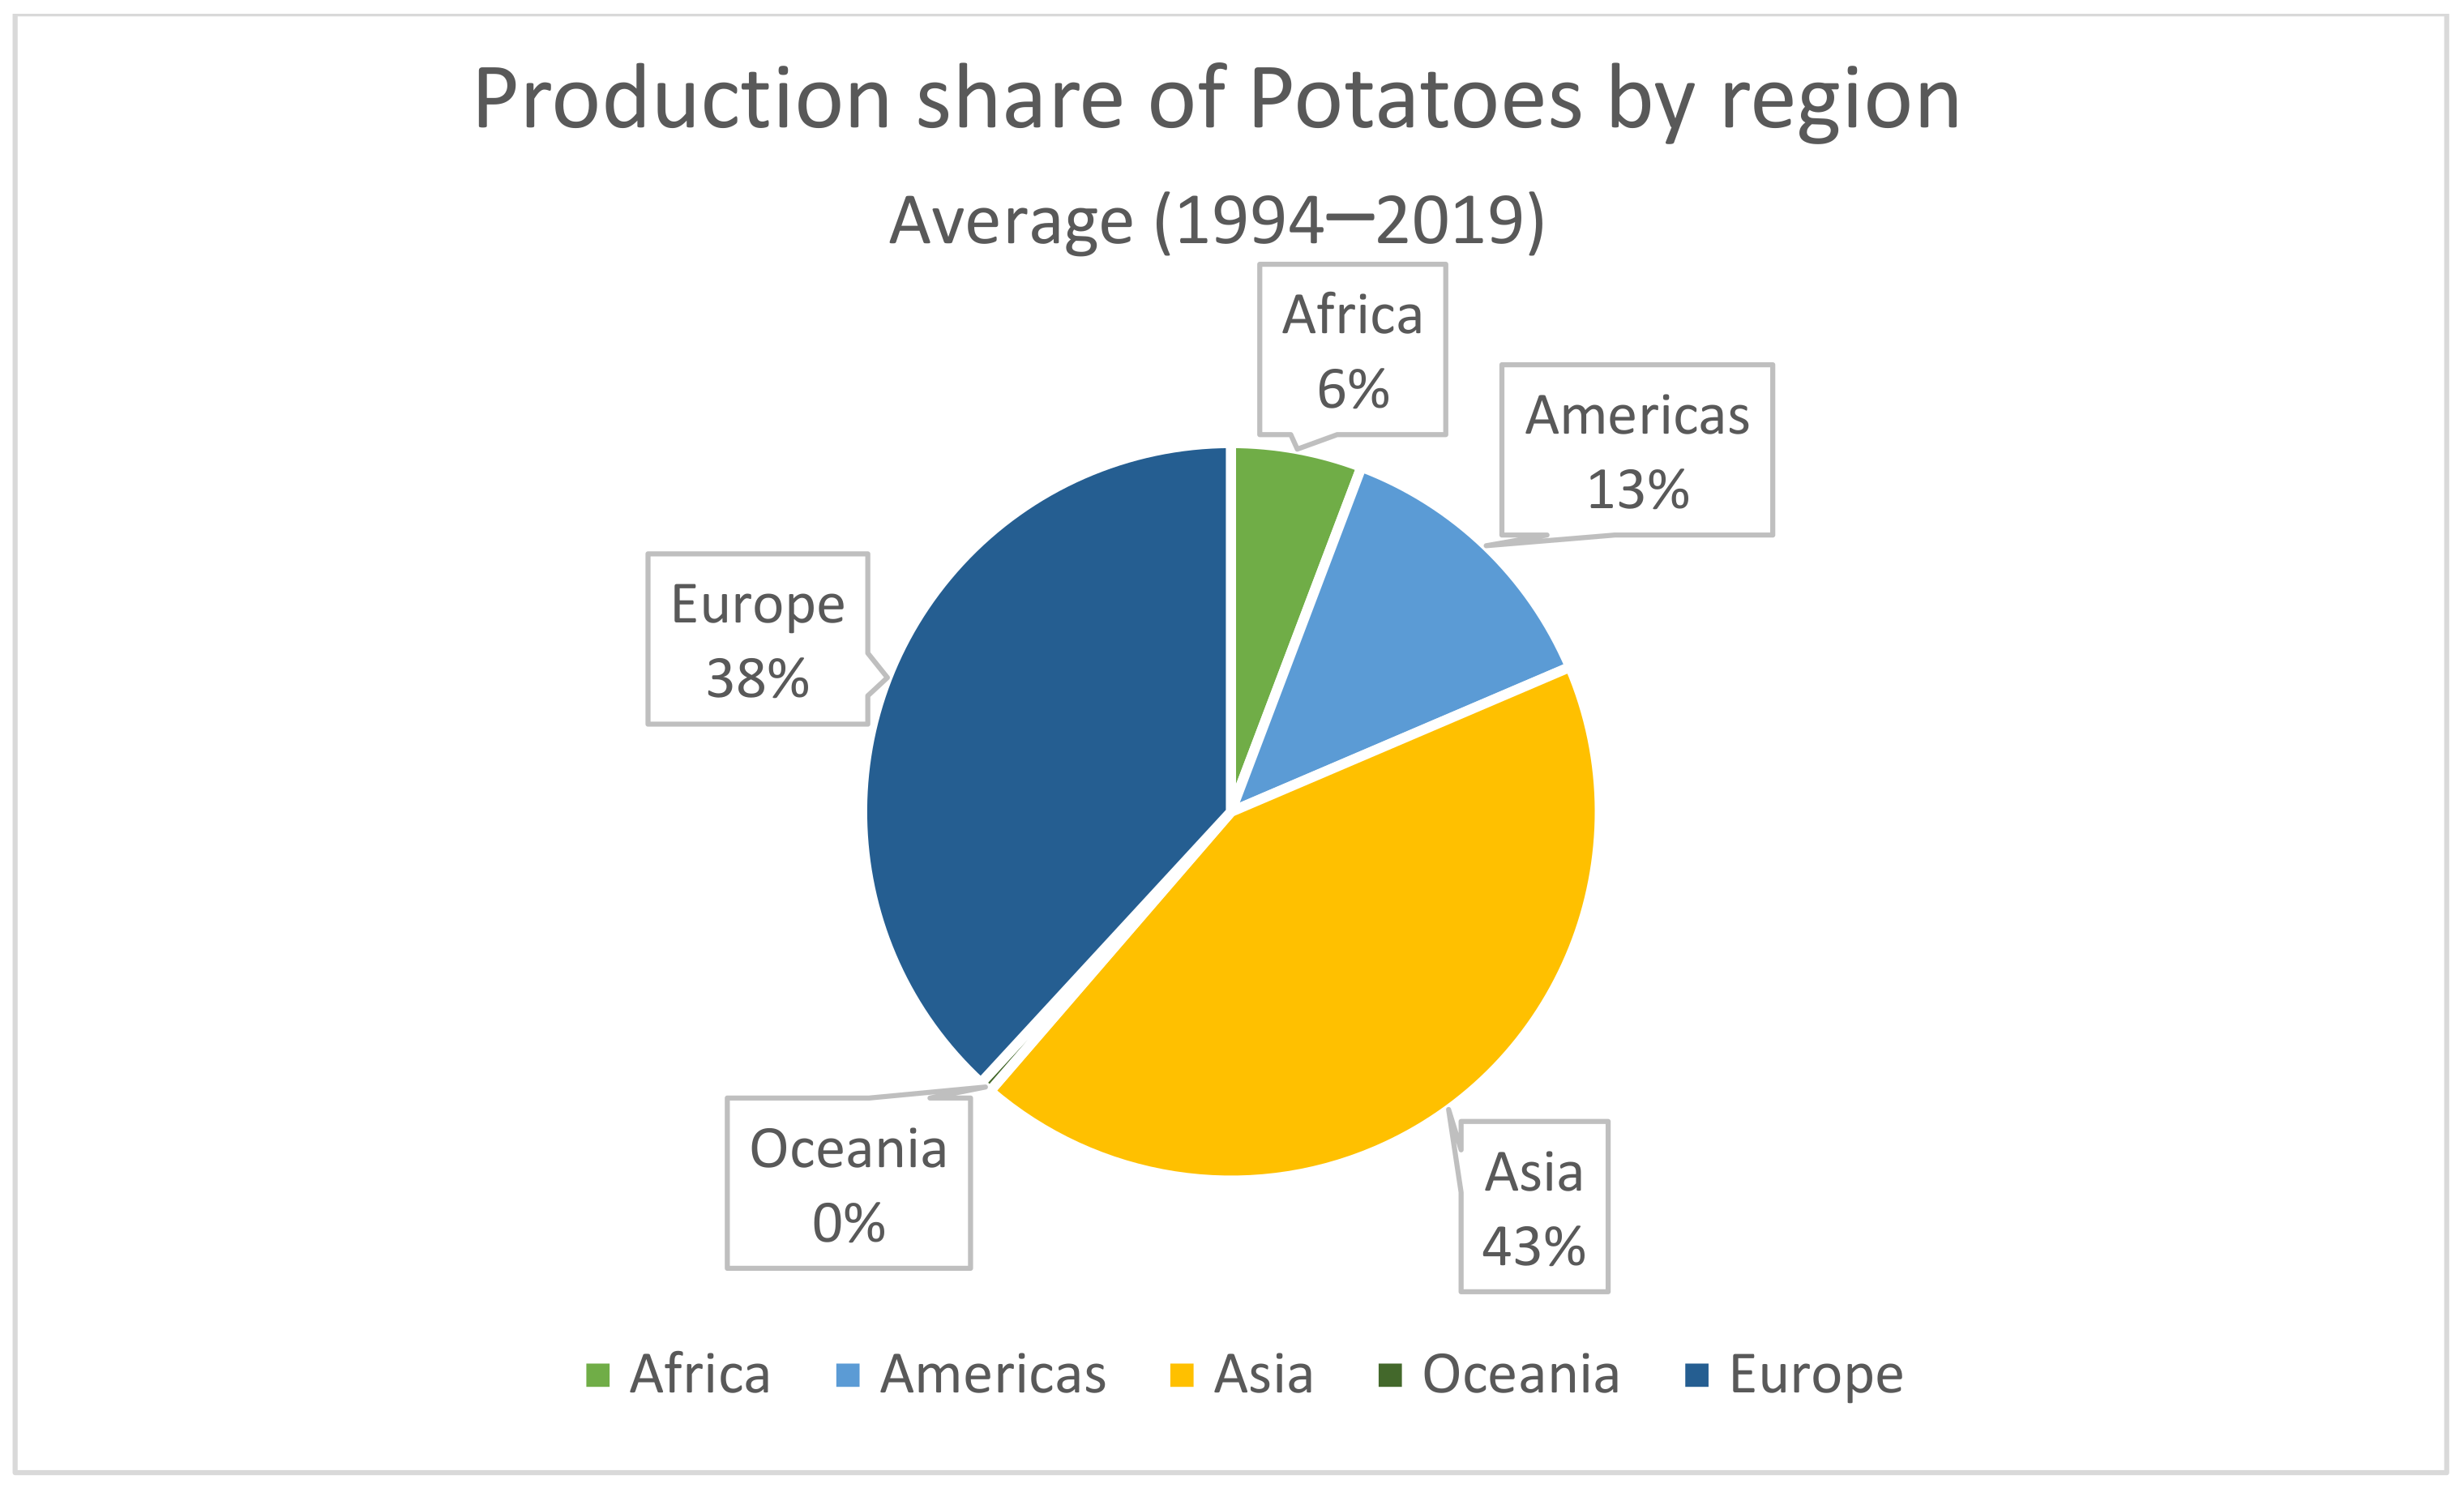 No small potatoes: Understanding risks and impacts to our agricultural  supply - Idaho National Laboratory